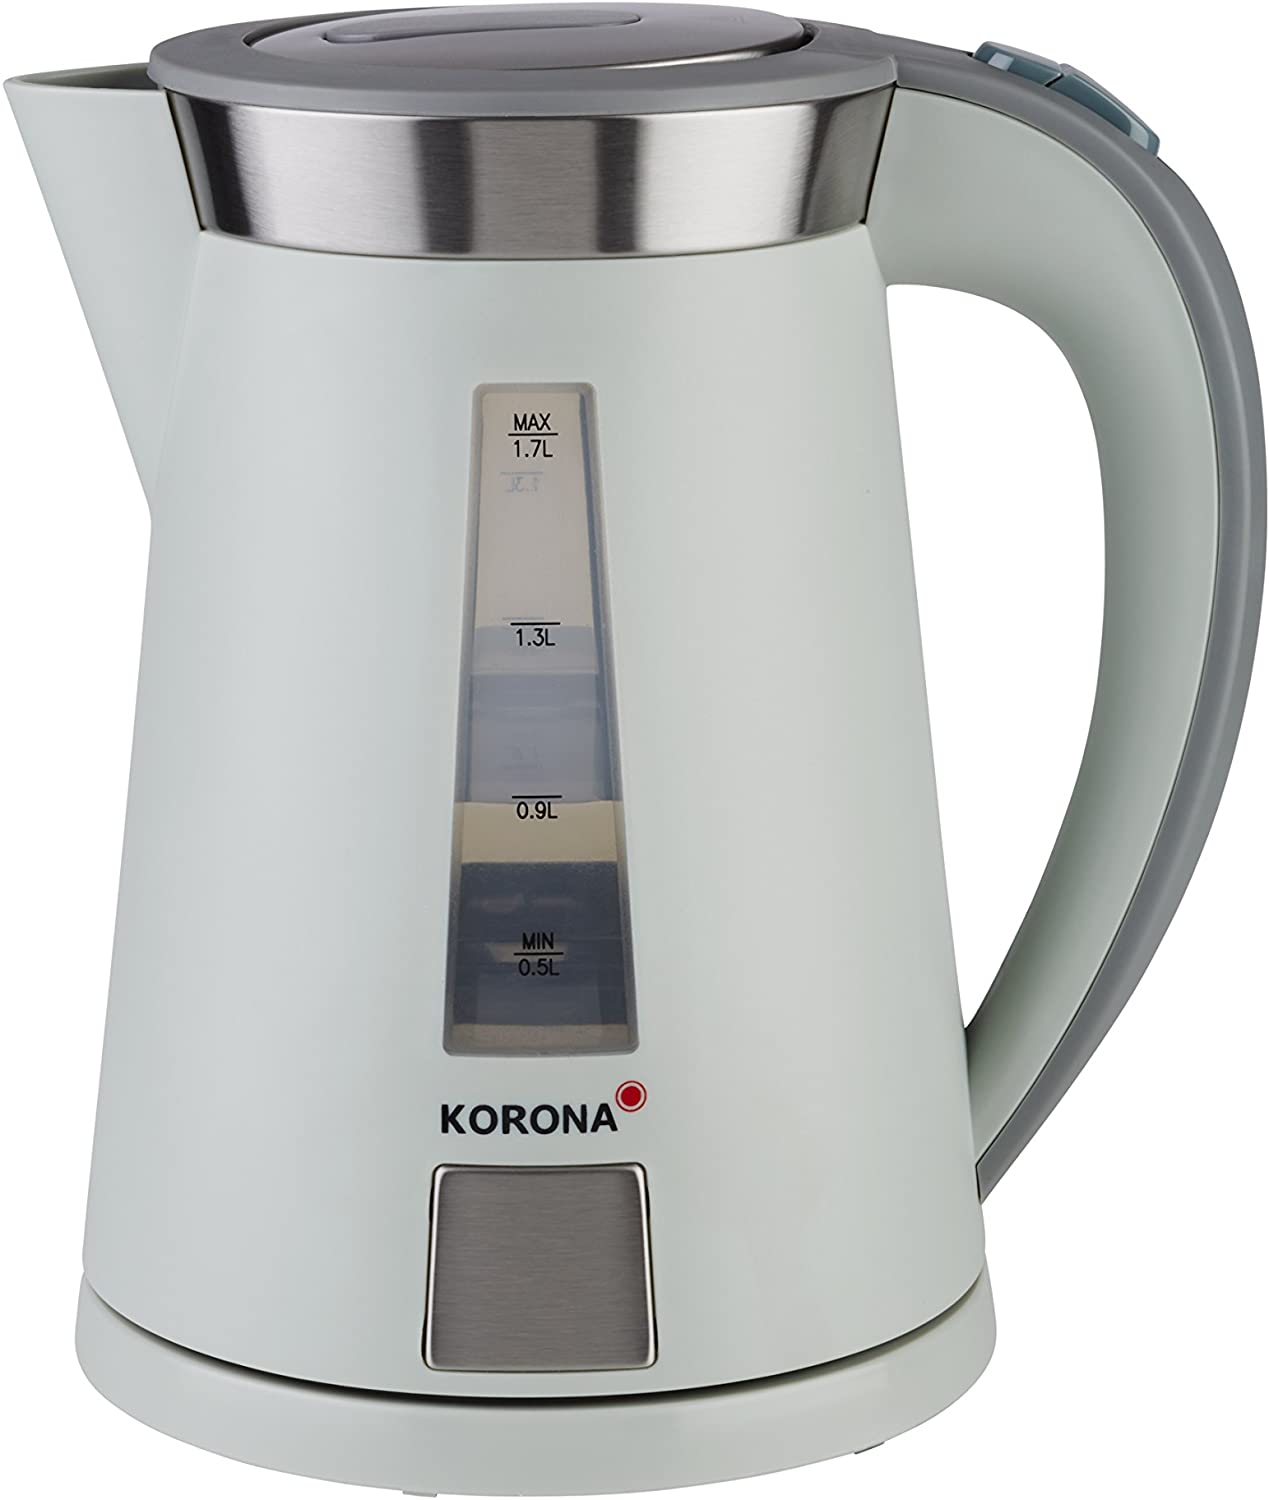 Korona 20205 Kettle Powerful Cooker with a 360° Base Station 2200 Watt 1.7 Litres Beige Sand Grey